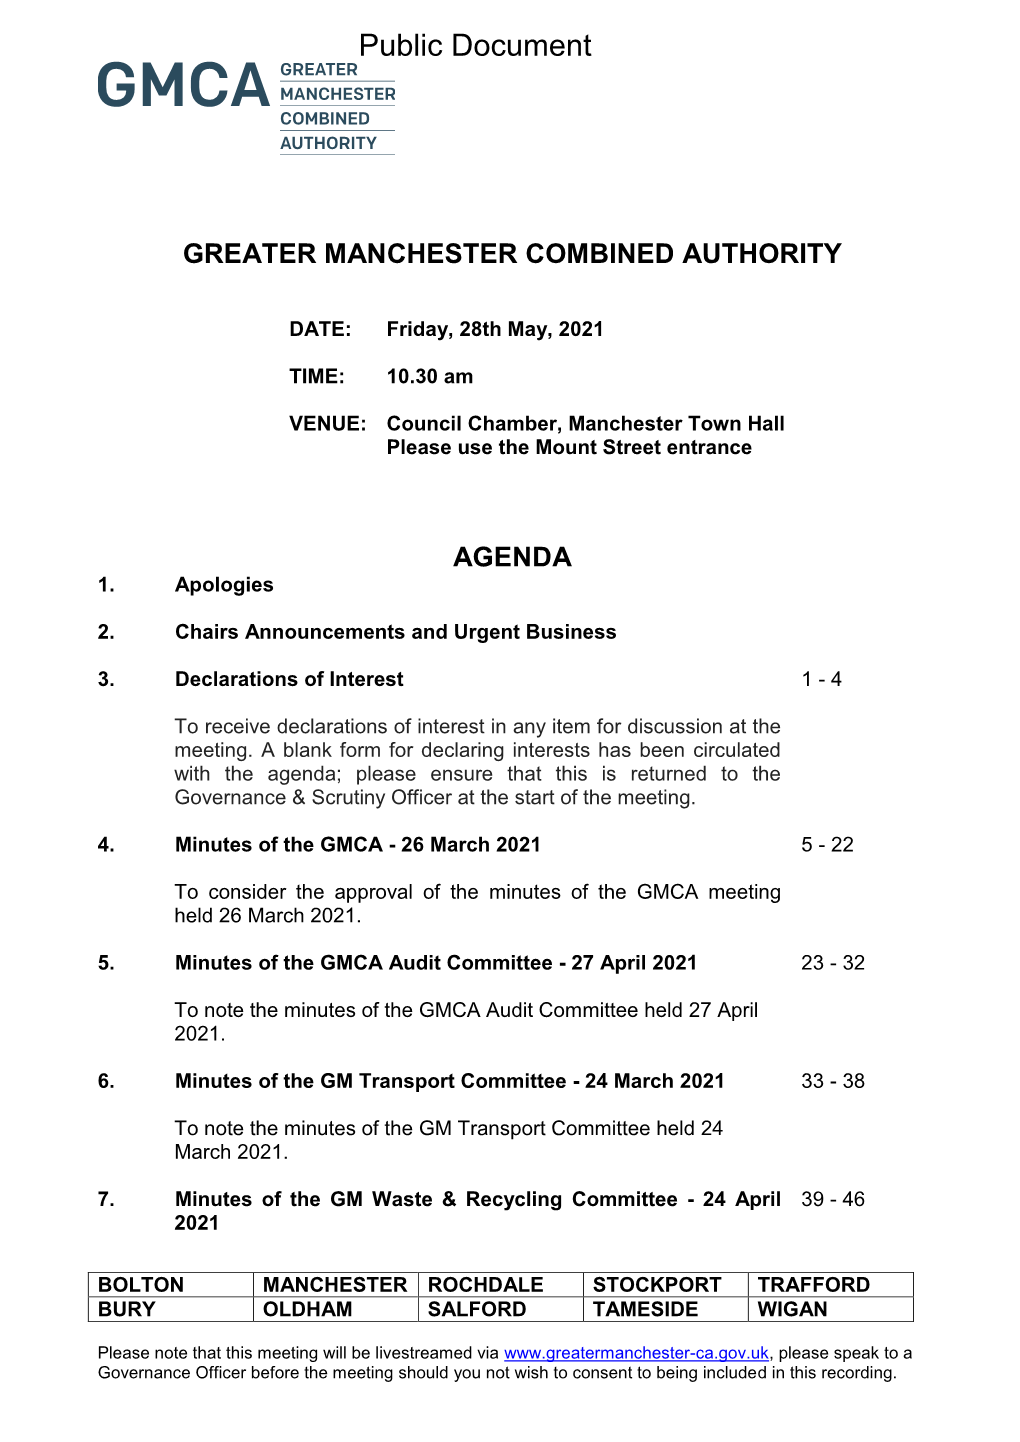 (Public Pack)Agenda Document for Greater Manchester Combined Authority, 28/05/2021 10:30